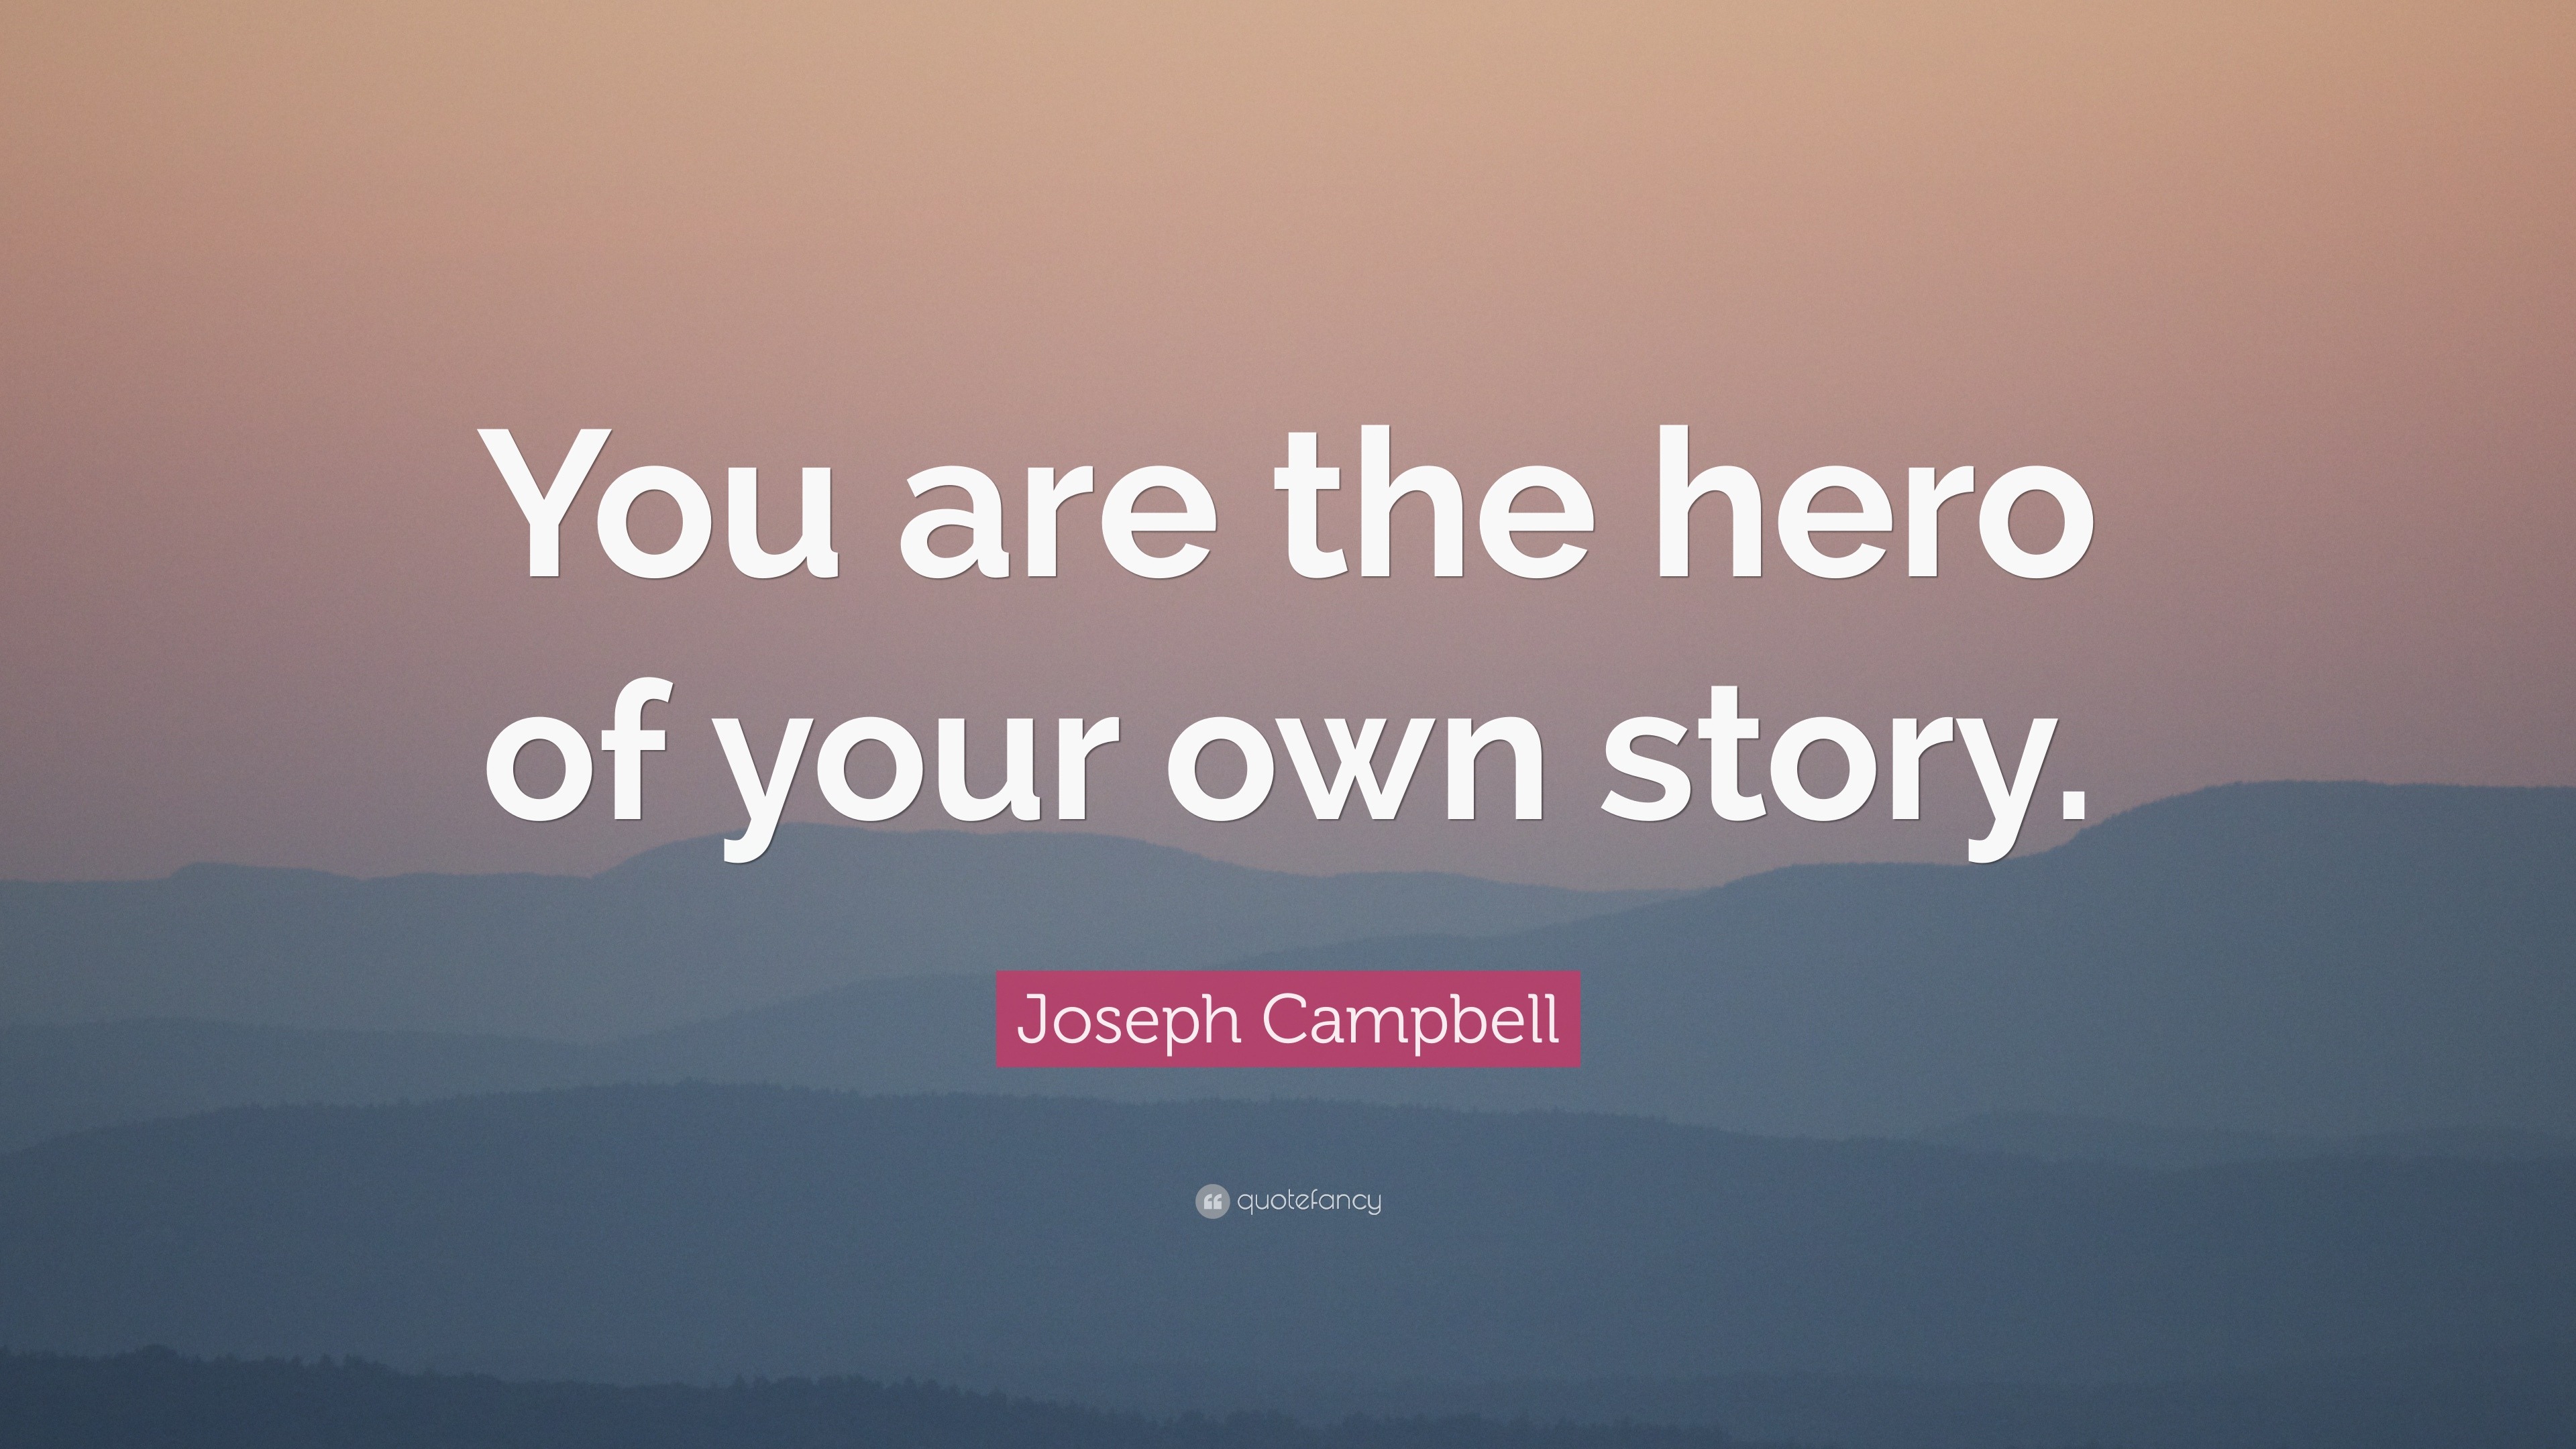 25166 Joseph Campbell Quote You are the hero of your own story